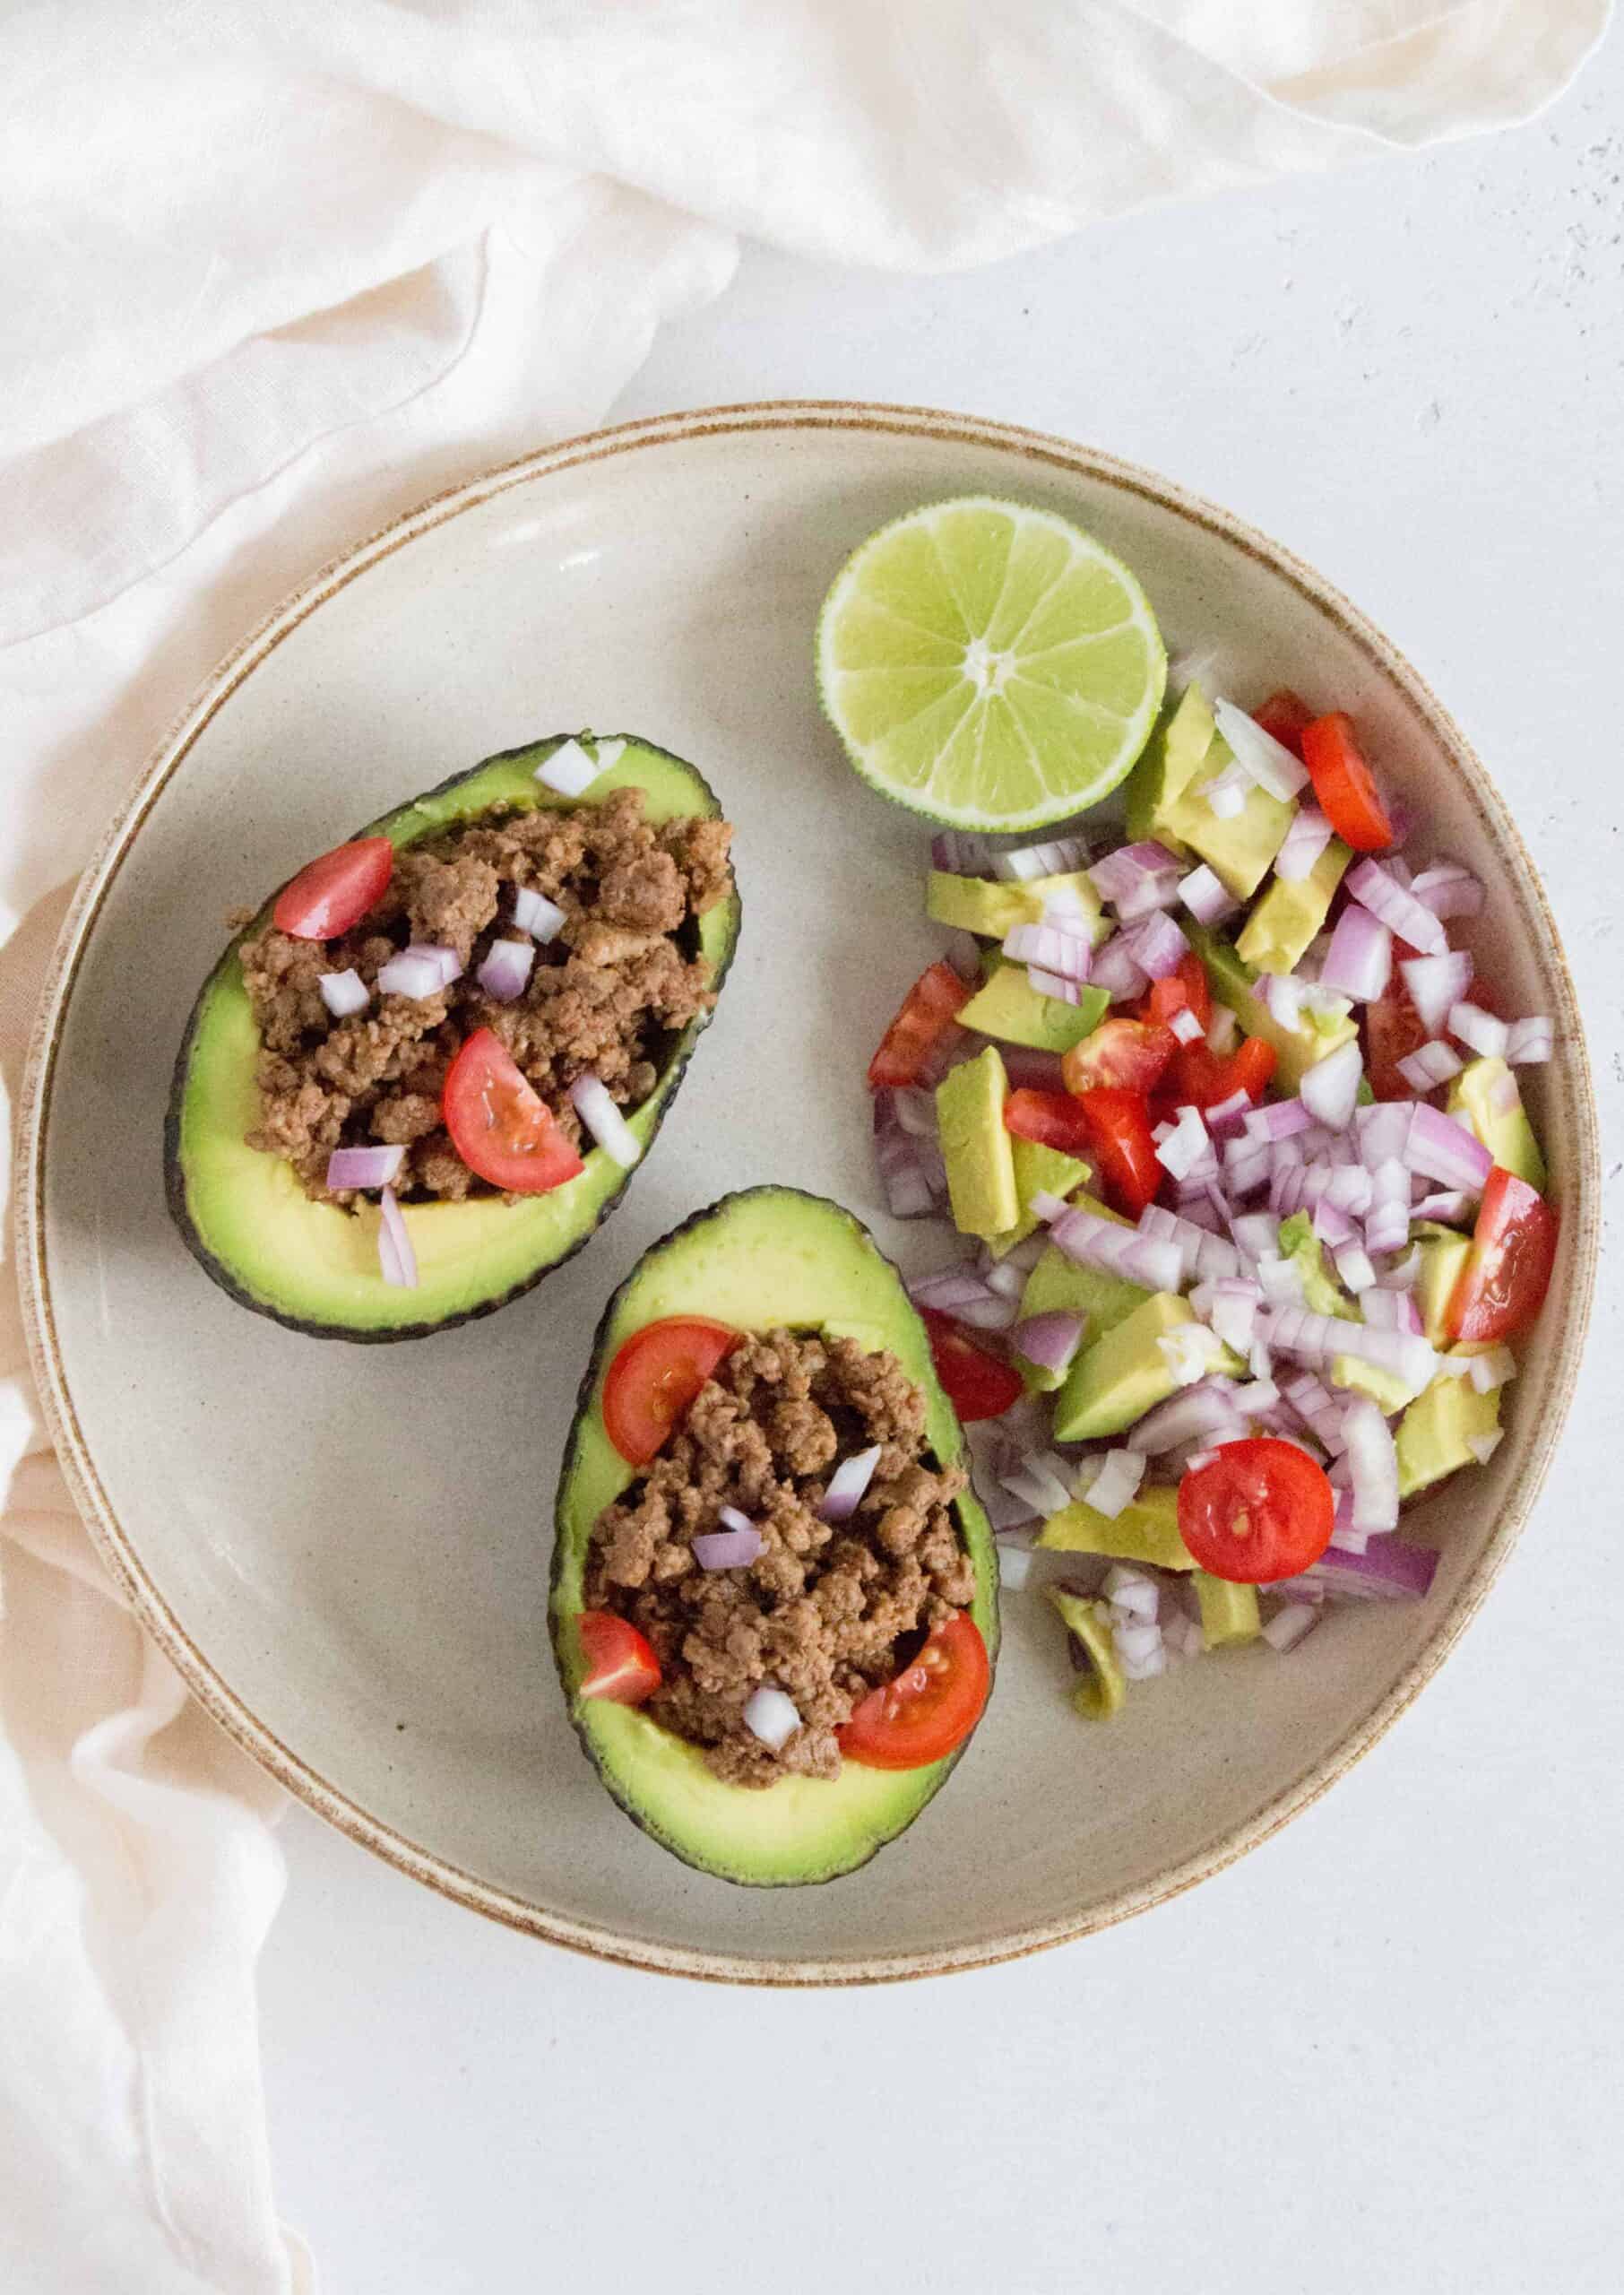 Tacos... but with an avocado. It's hard to go wrong with this switcharoo! Load up the halved avocados with the easiest taco meat and toppings of your choice for an easy dinner tonight!